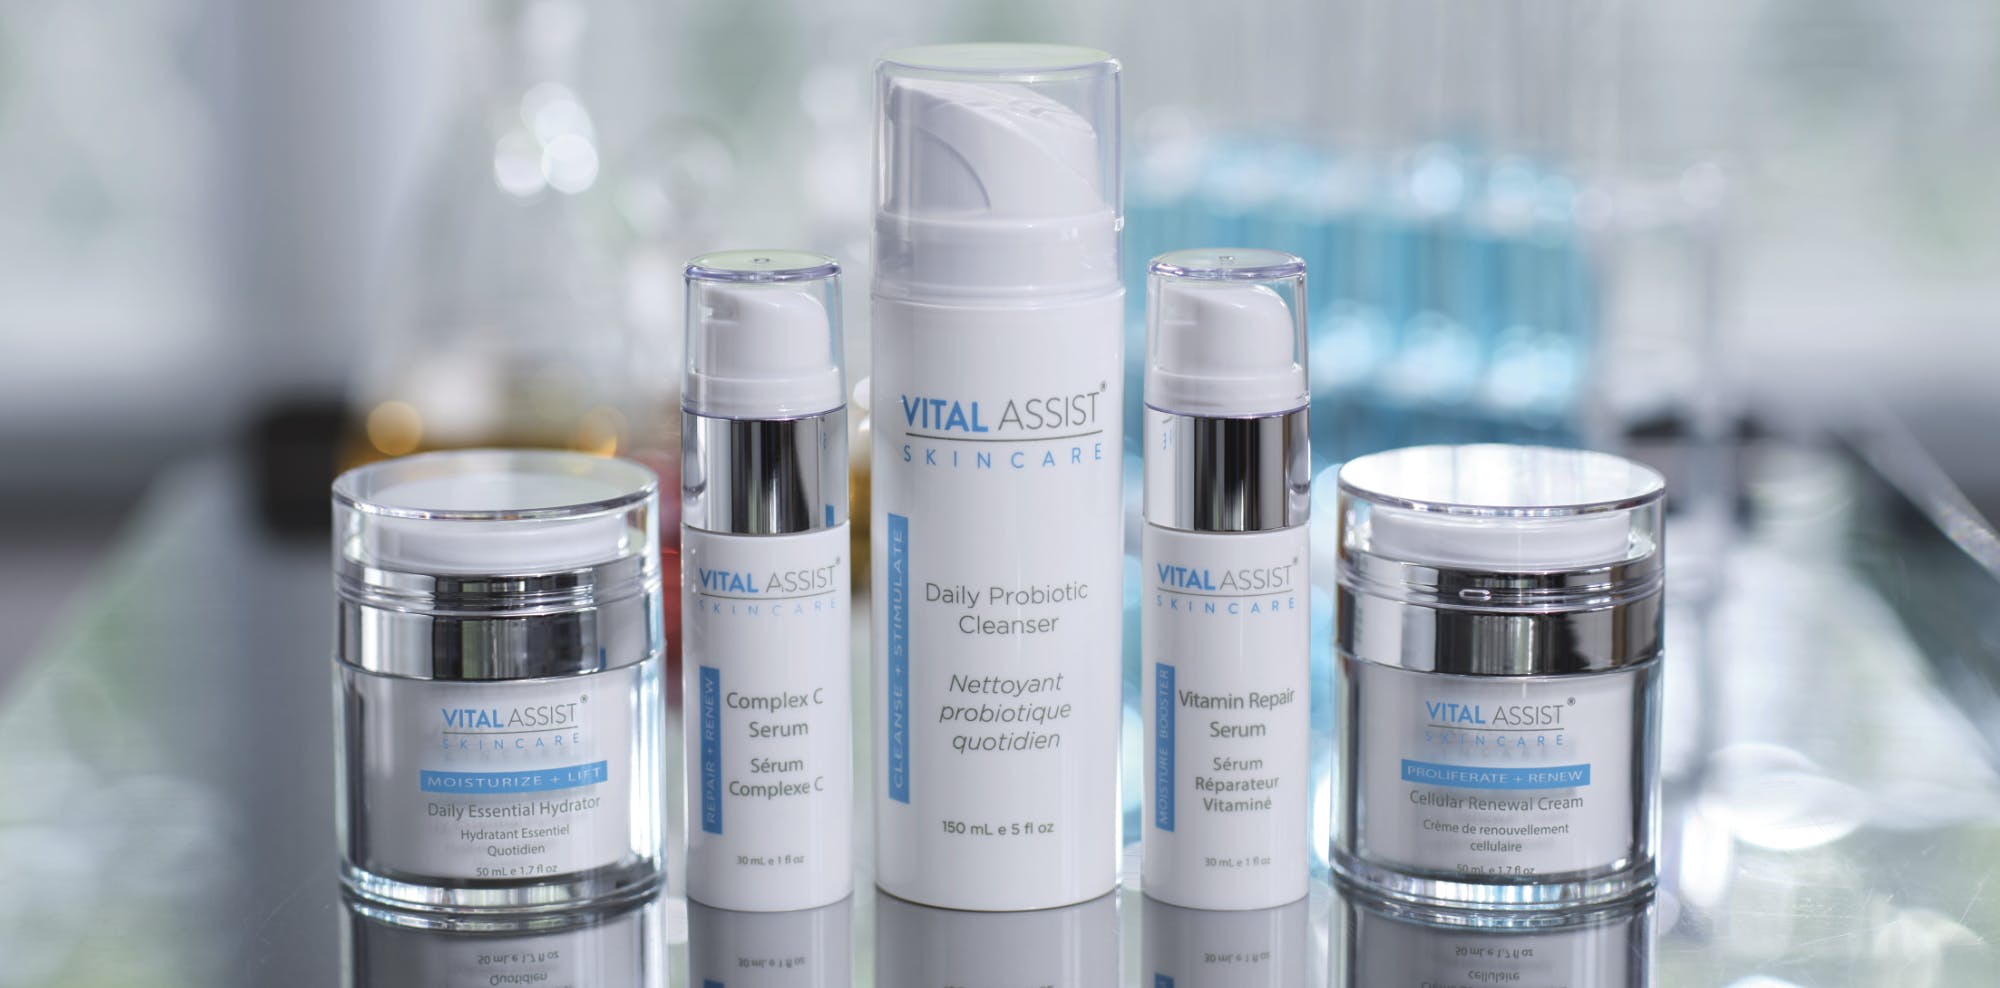 The range of Vital Assist Skincare products